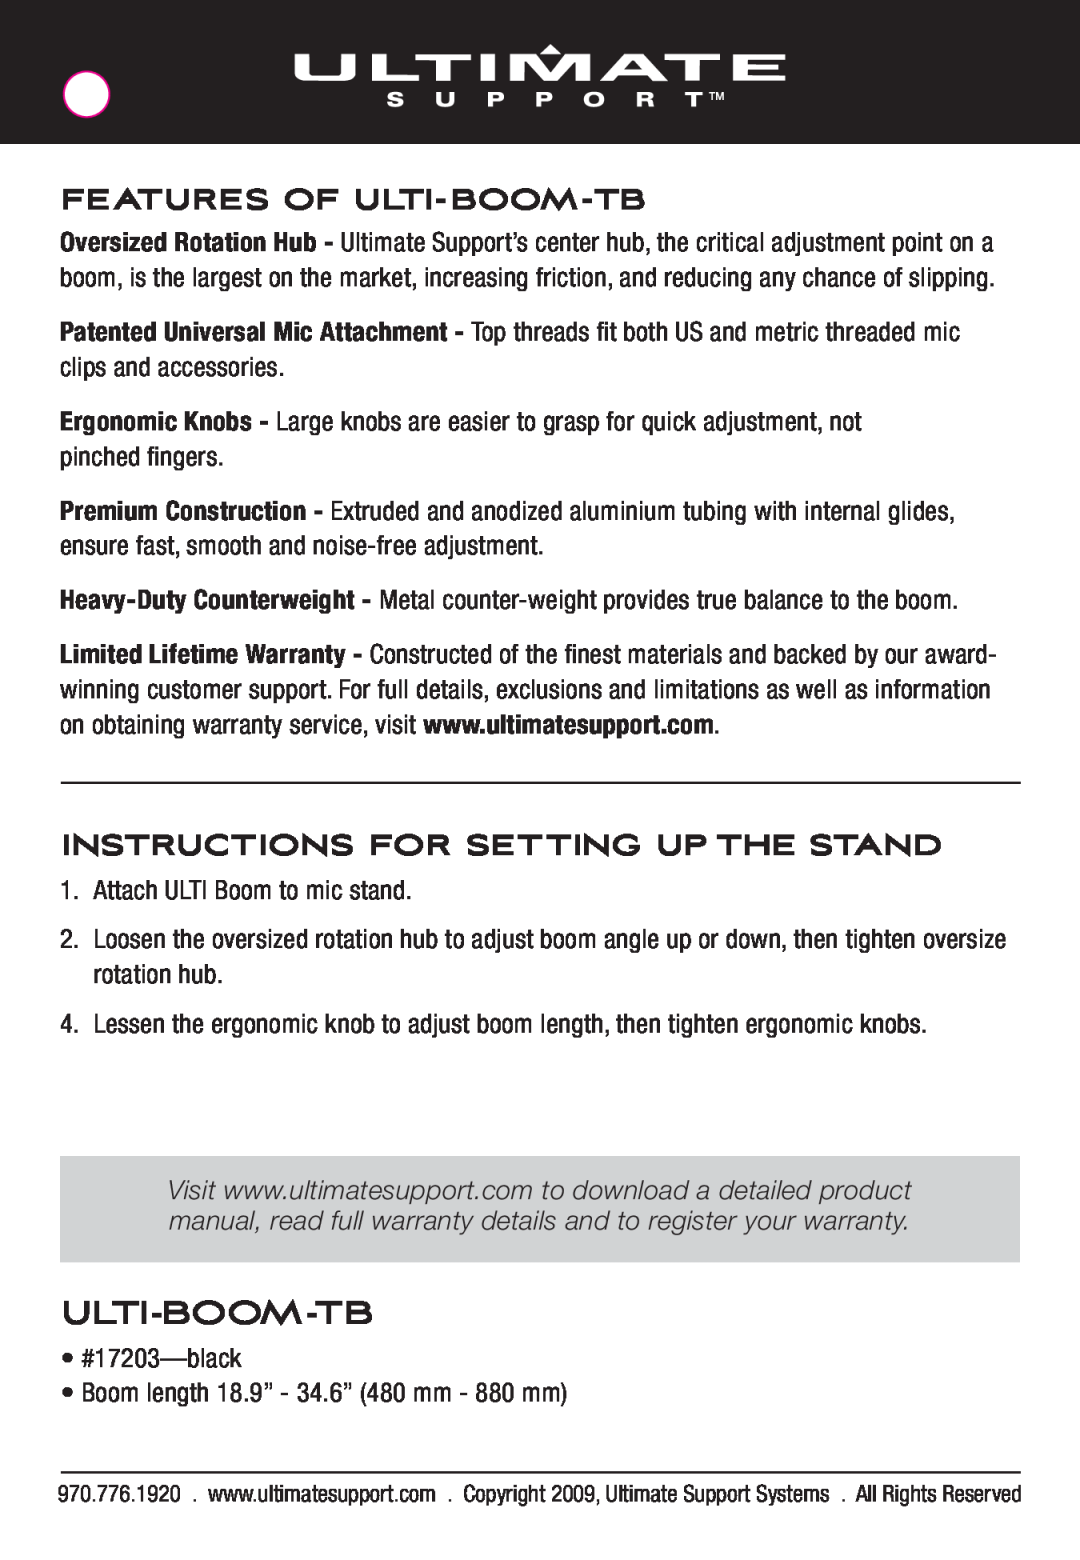 Ultimate Support Systems 17203T manual Features Of Ulti-Boom-Tb, Instructions For Setting Up The Stand 